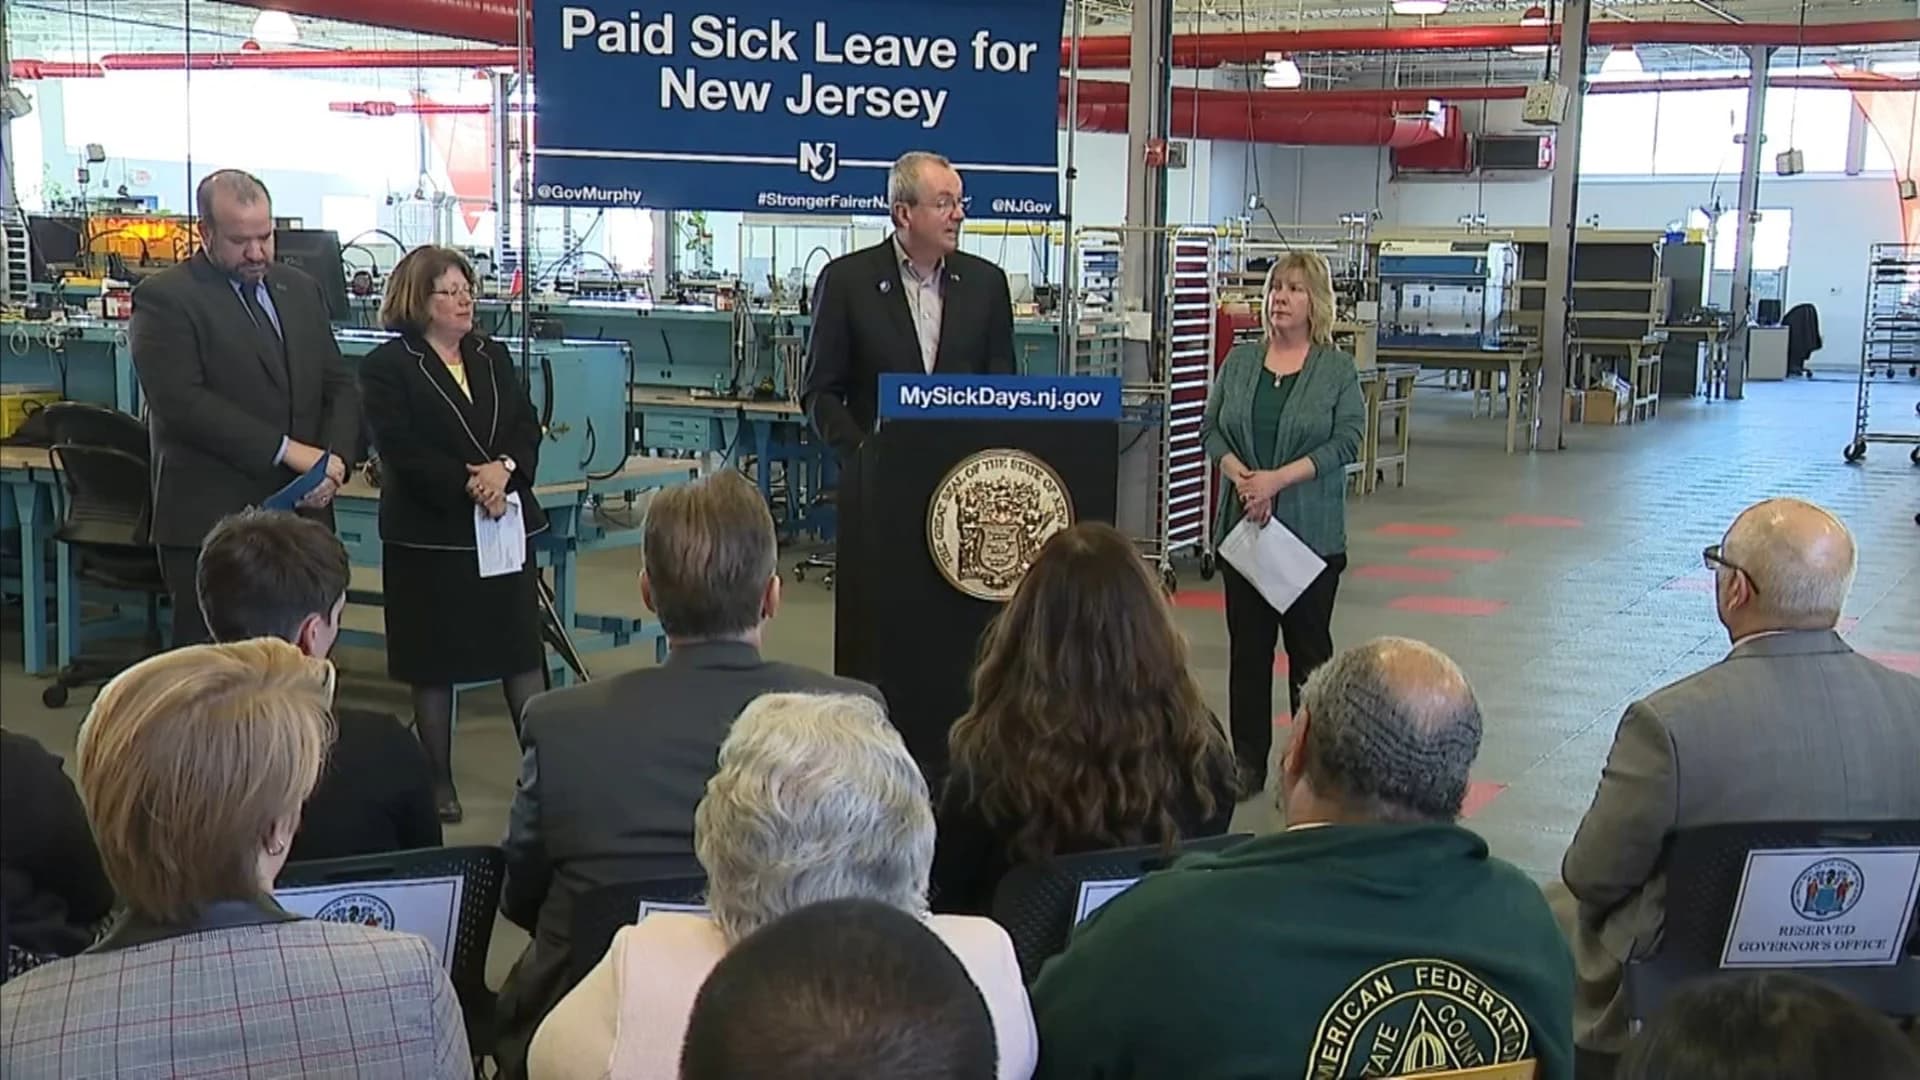 Paid sick leave legislation signed by Gov. Murphy now in effect